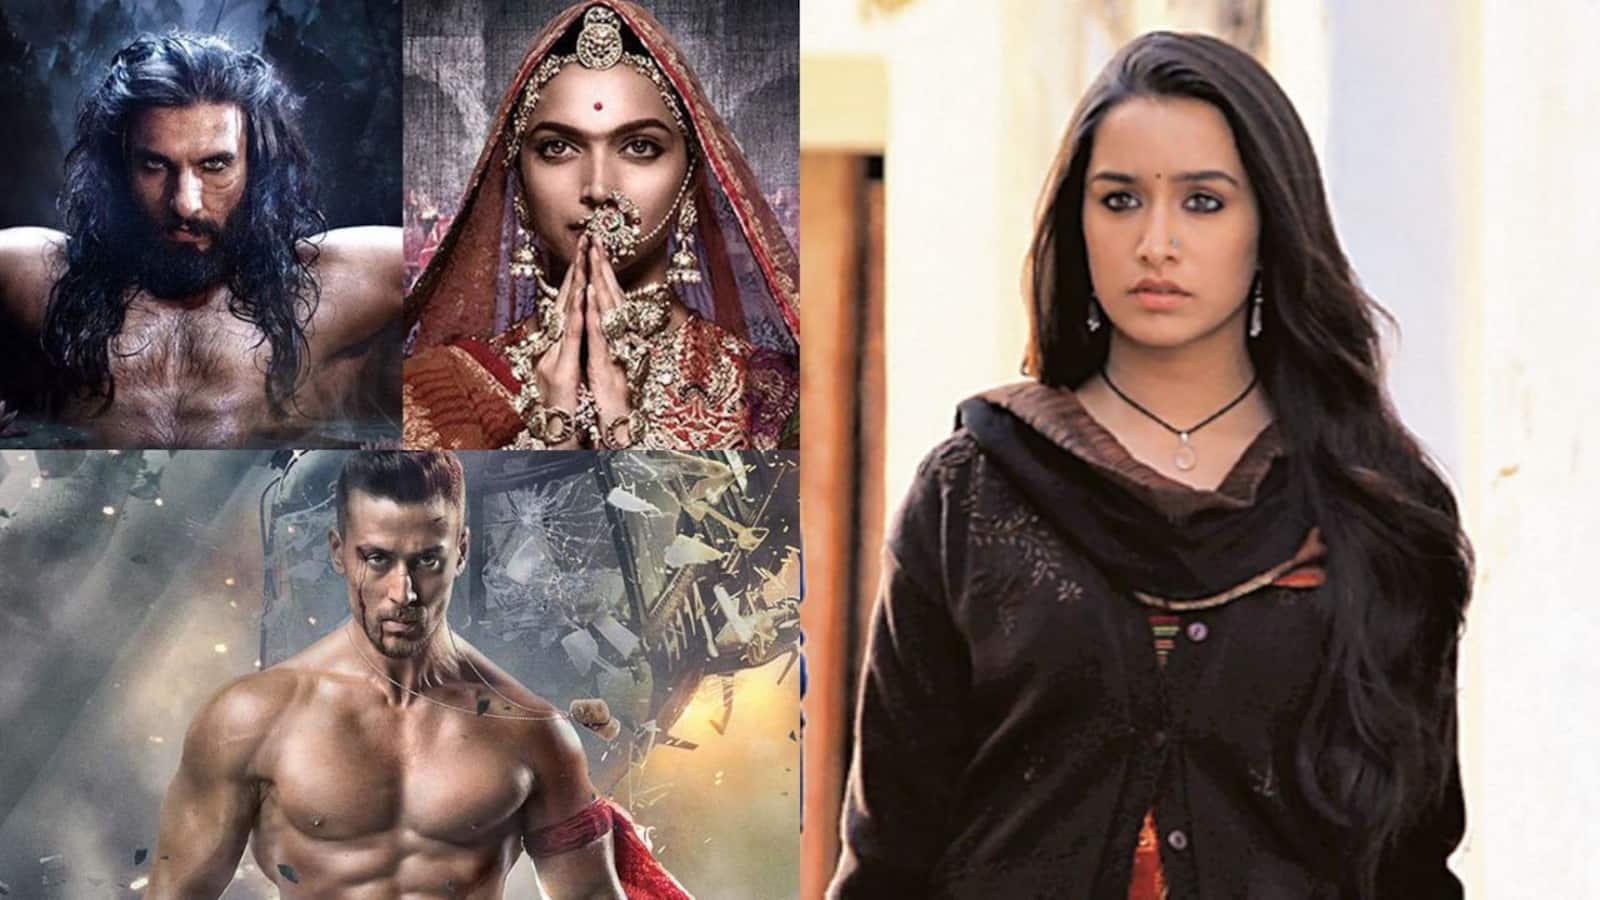 Ranveer Singh, Deepika Padukone, Tiger Shroff, Shraddha Kapoor and more: When Bollywood delivered 8 blockbusters in a year – view full list